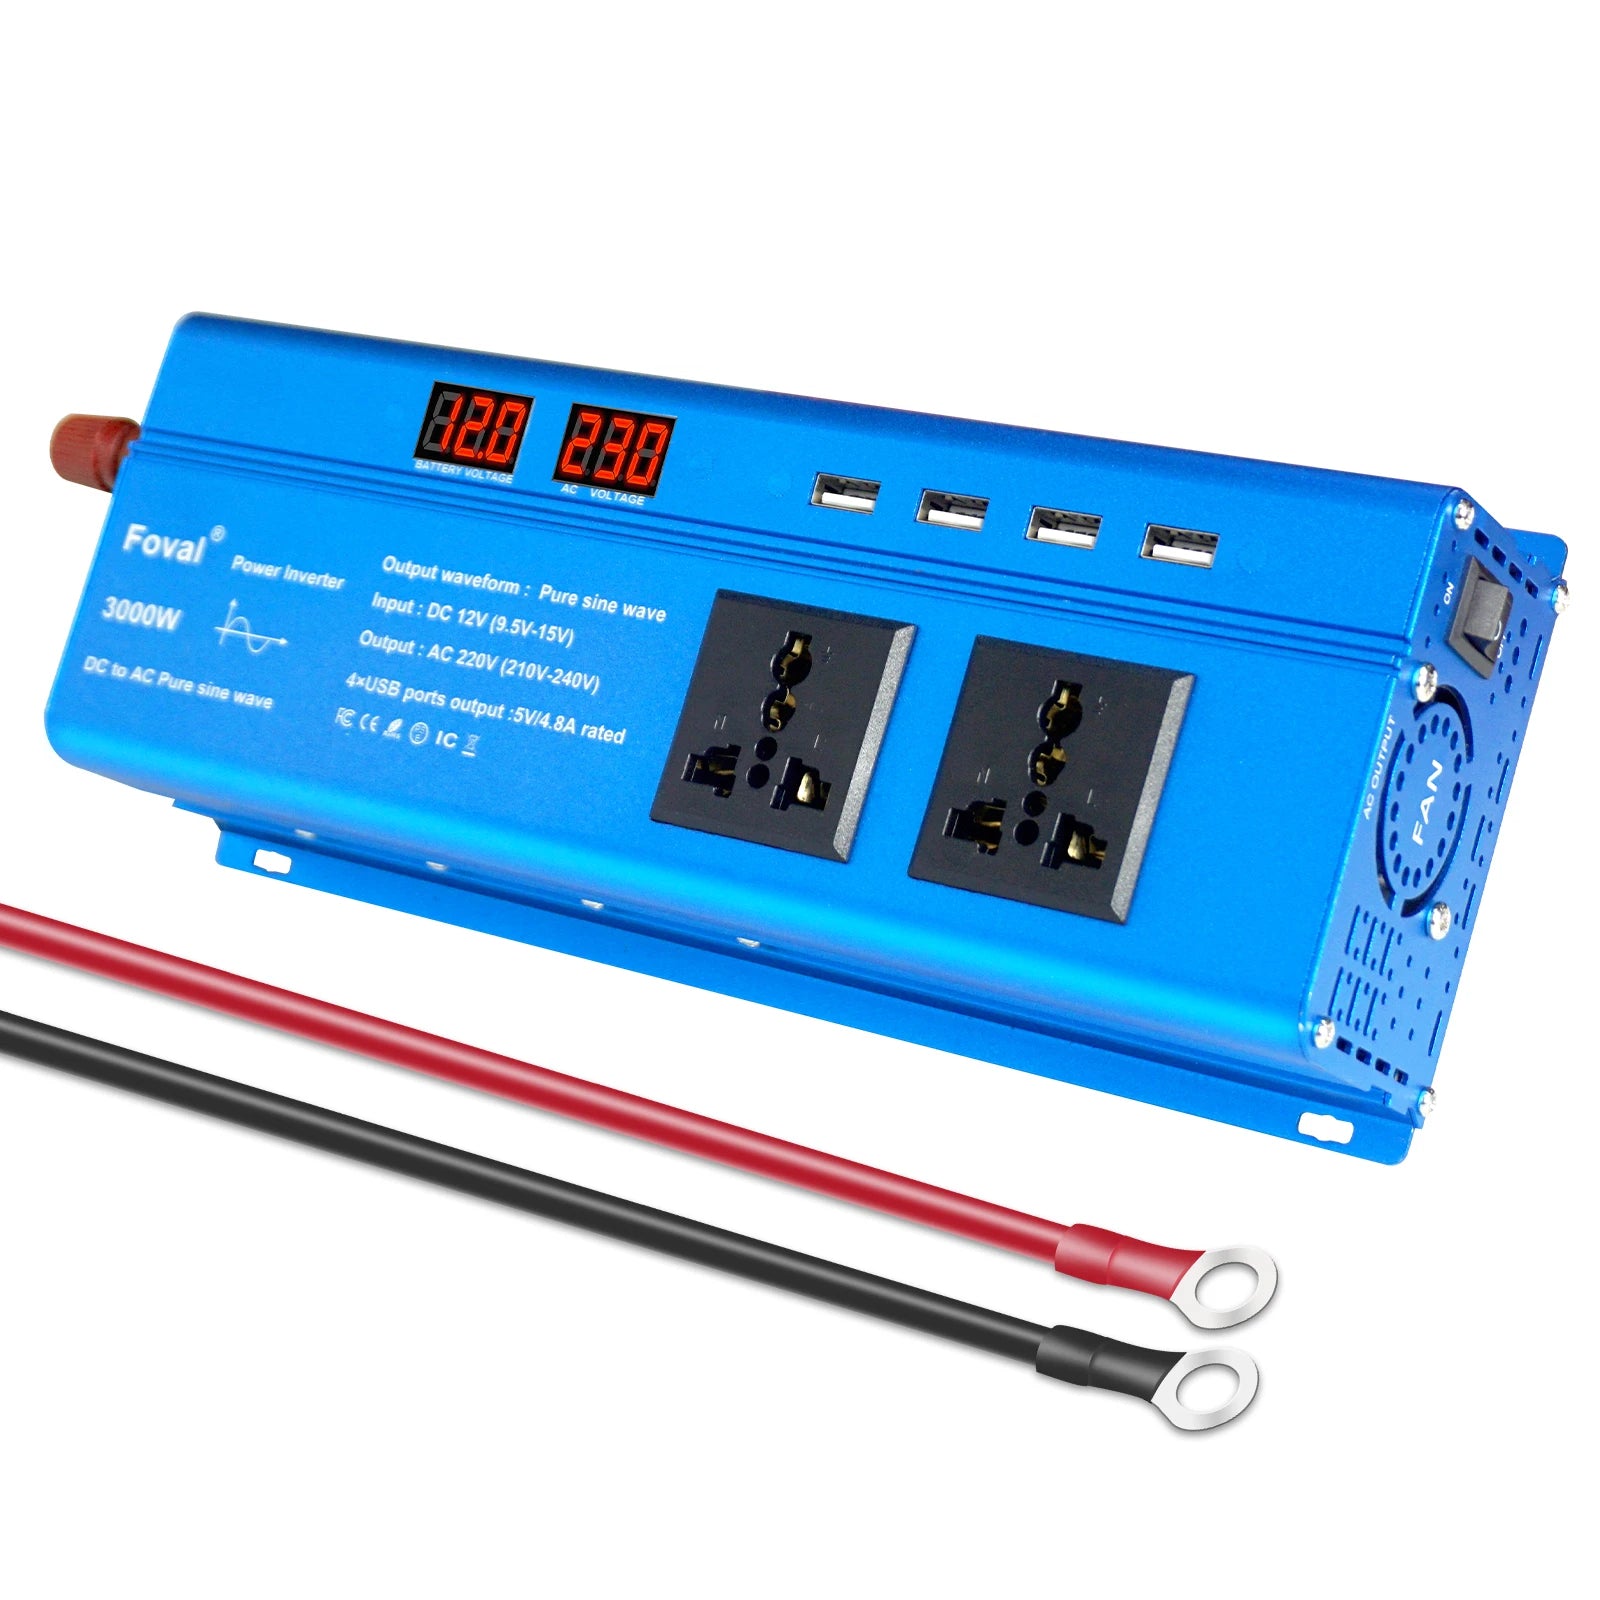 DC 12V to AC 220V Pure Sine Wave Inverter, Foval DC/AC Inverter, pure sine wave output, customizable power and voltage options, suitable for various applications.